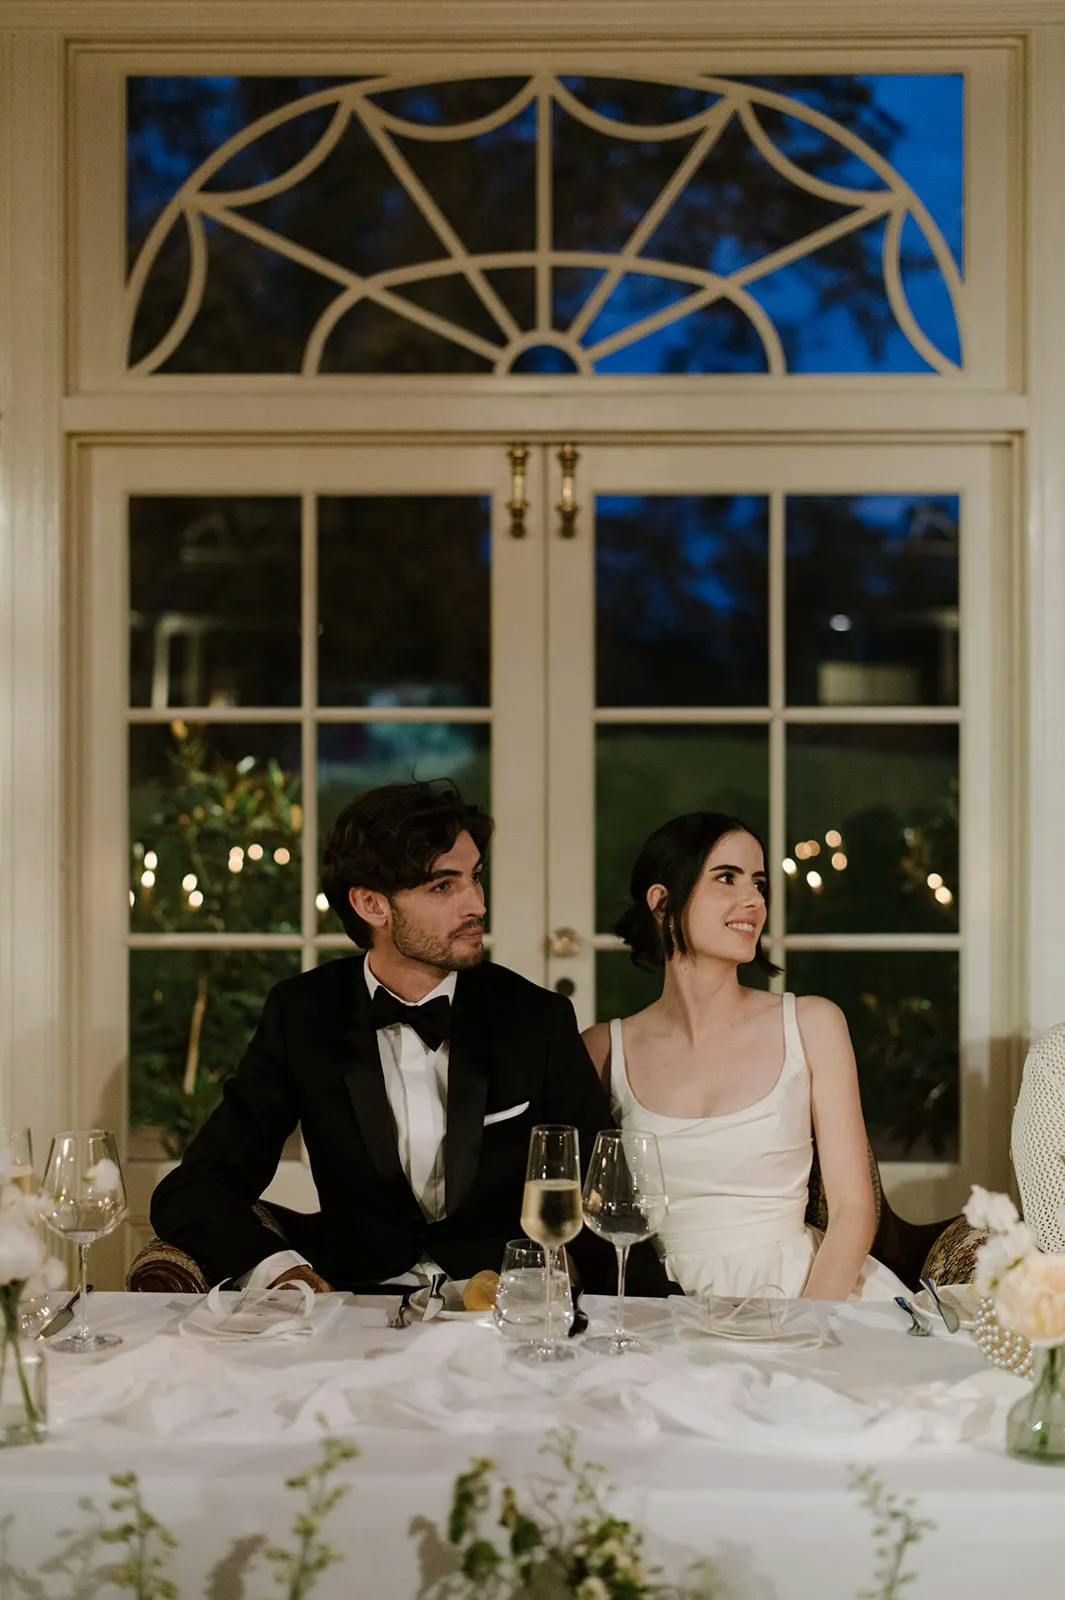 A man in a black tuxedo and a woman in a white dress sit at a table, smiling, during an evening event. They are inside a room with a large window and decorative architecture behind them. The table is set with glassware and floral arrangements.